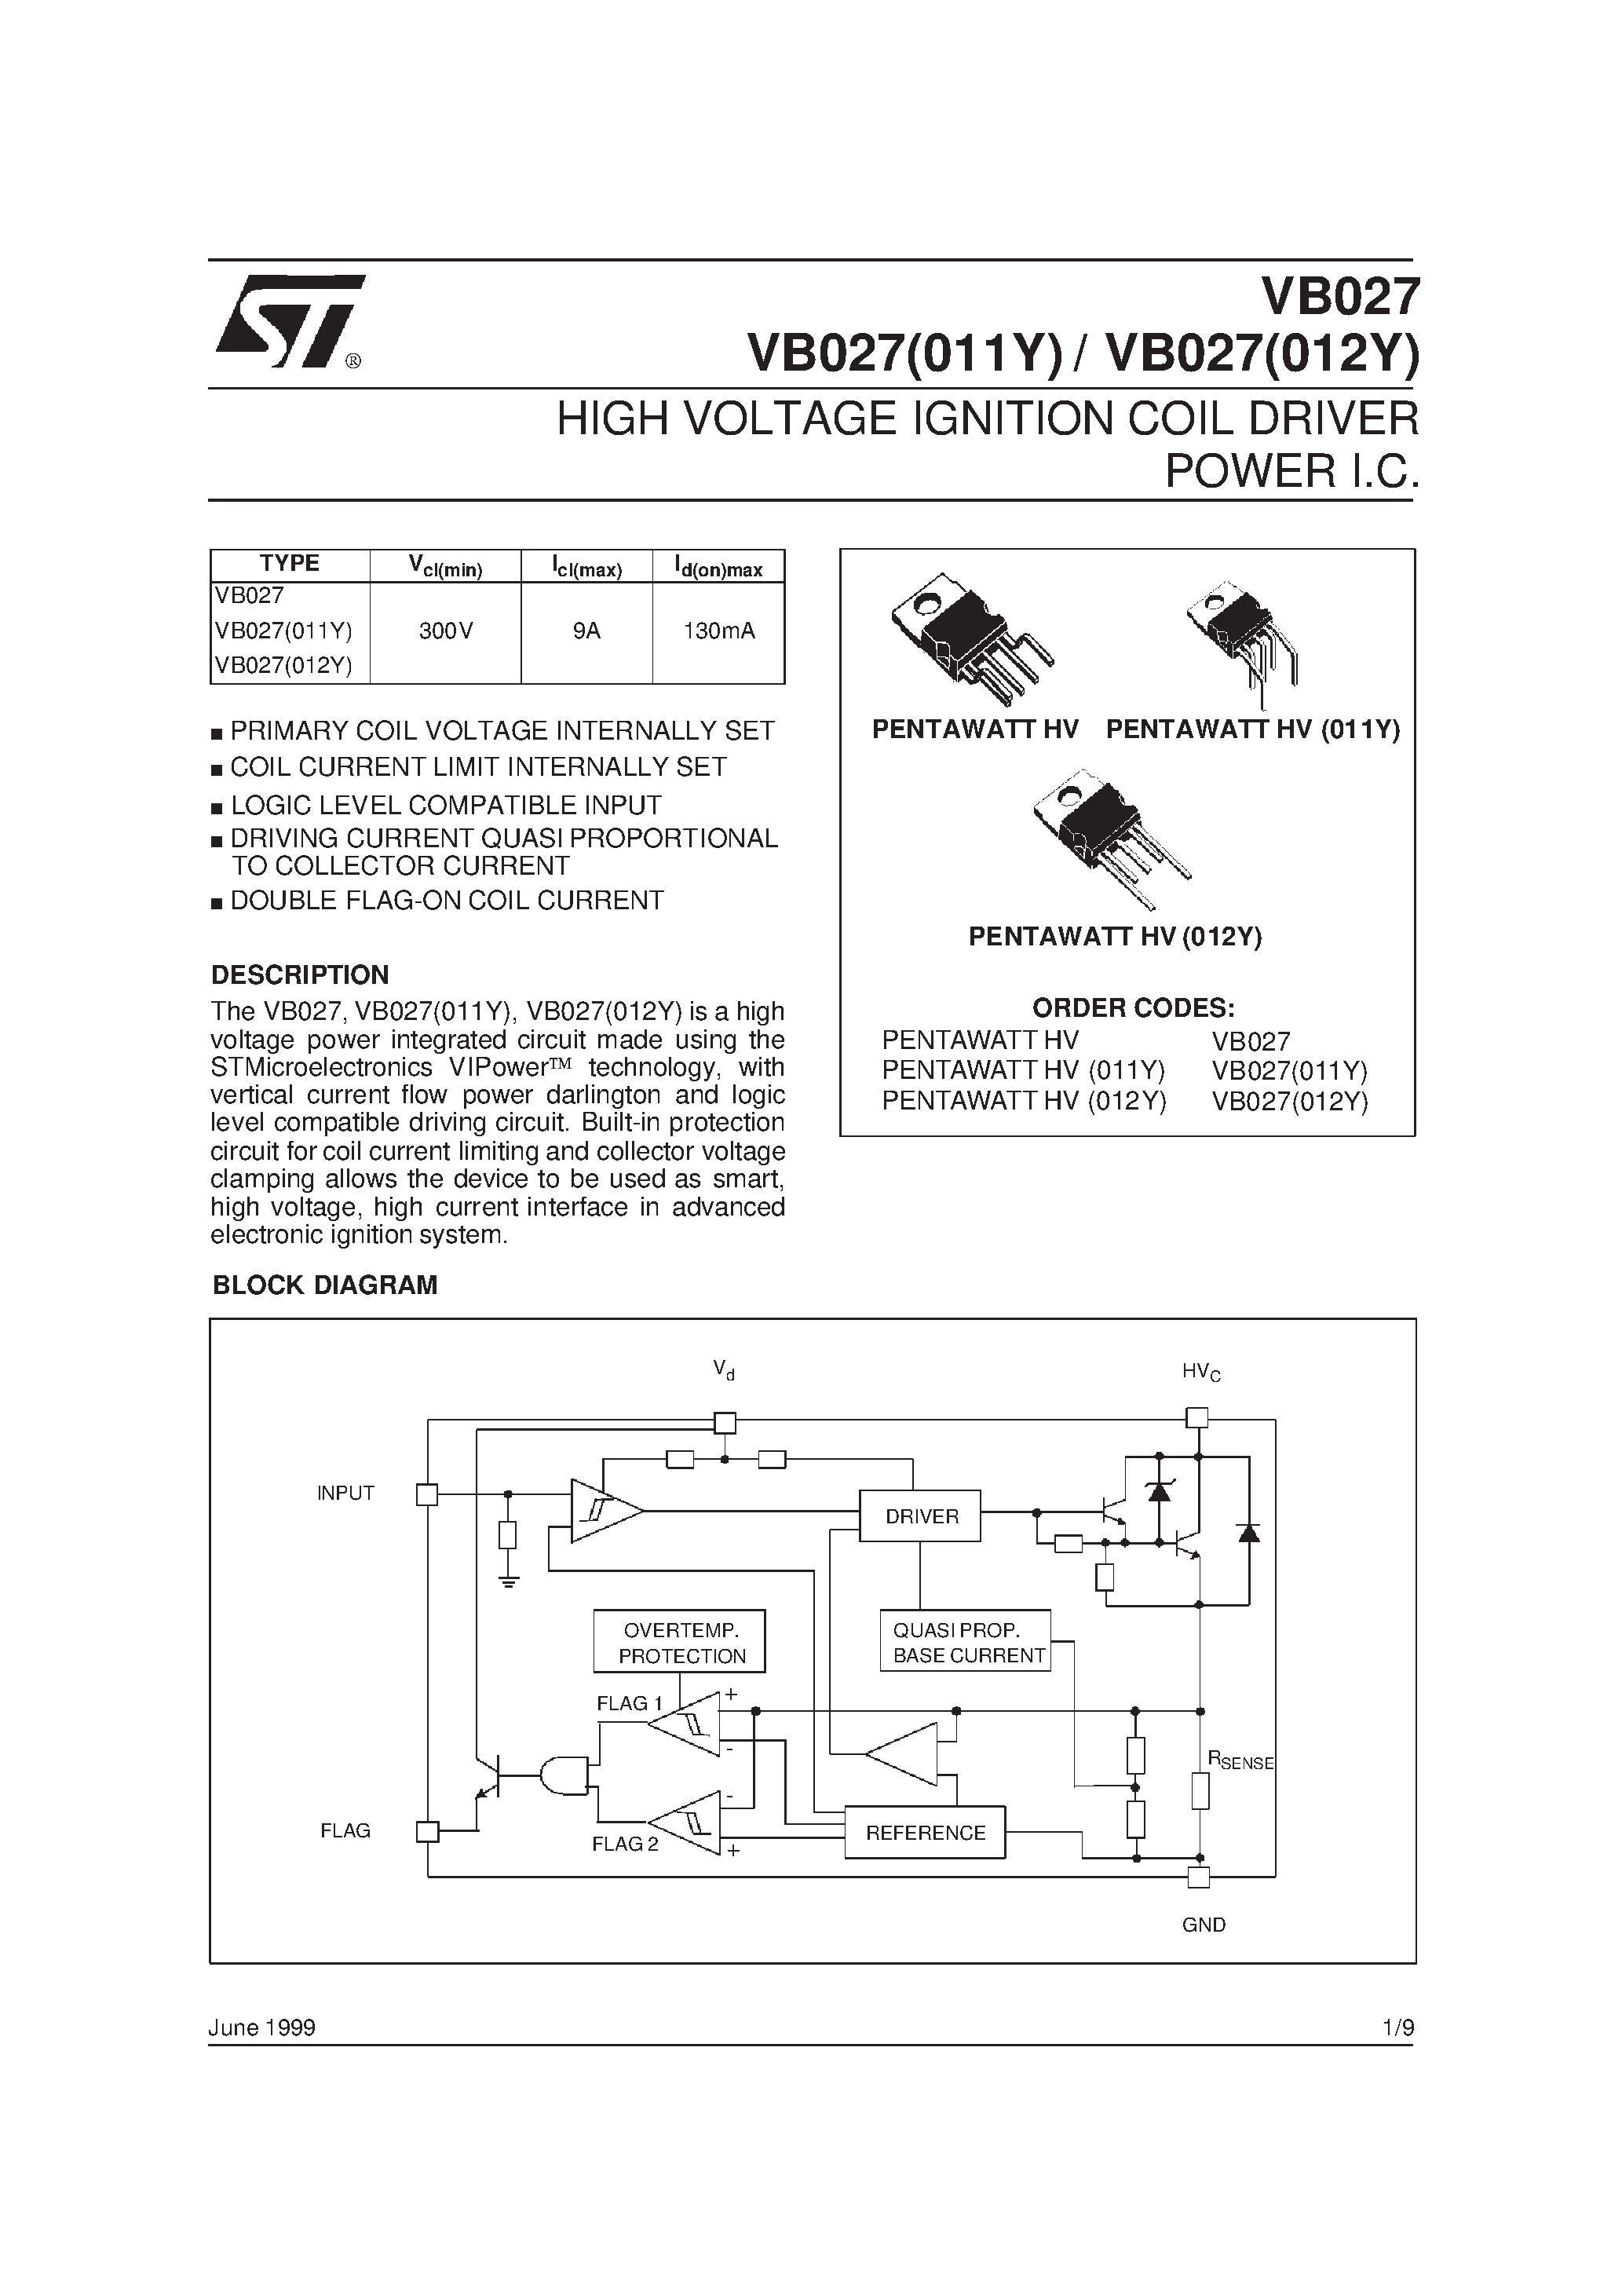 Datasheet VB027 - HIGH VOLTAGE IGNITION COIL DRIVER POWER I.C. page 1